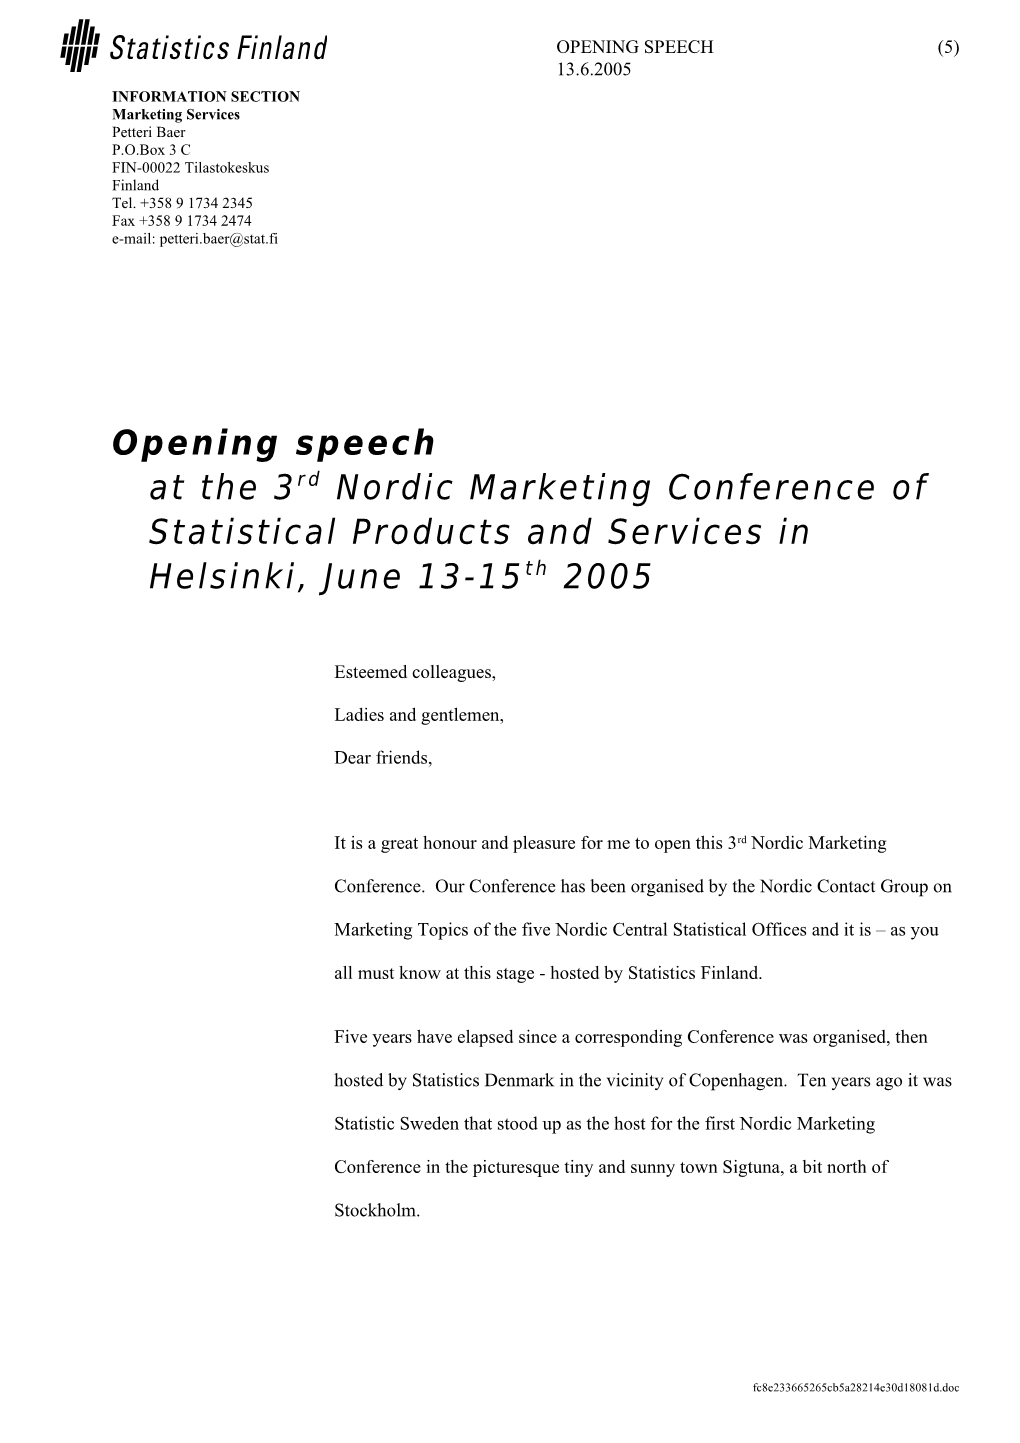 Opening Speech at the 3Rd Nordic Marketing Conference of Statistical Products and Services